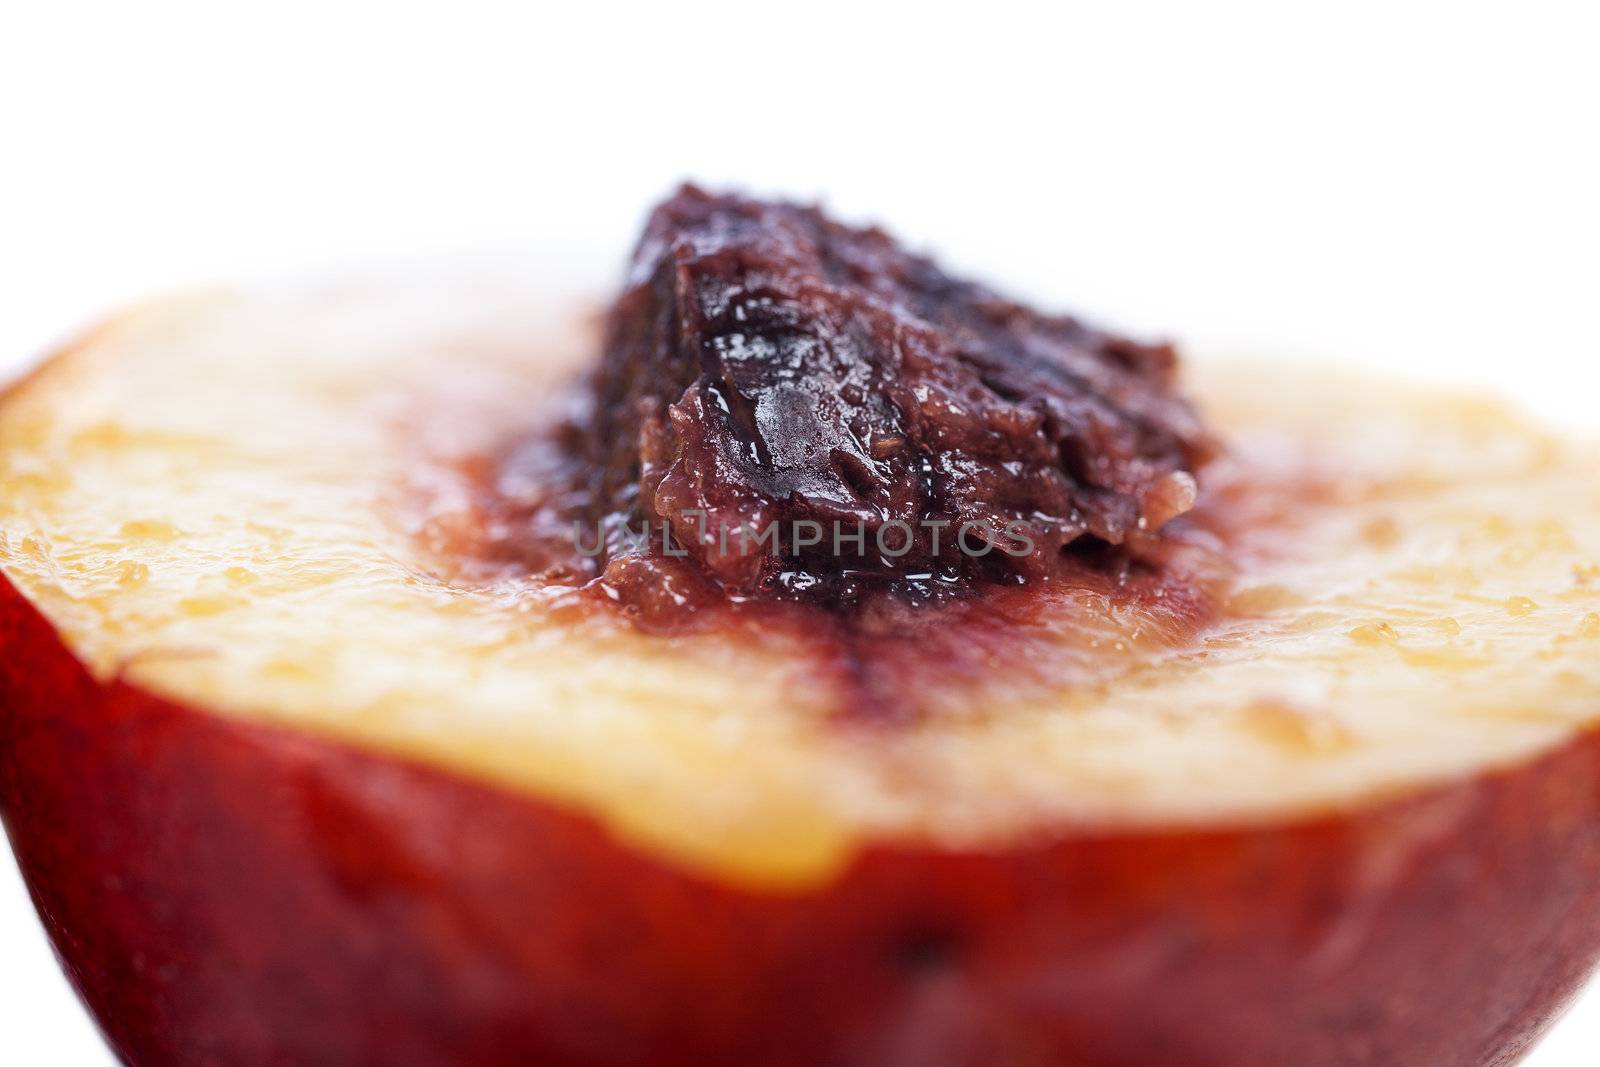 Fresh Nectarine sliced in two exposing the seed